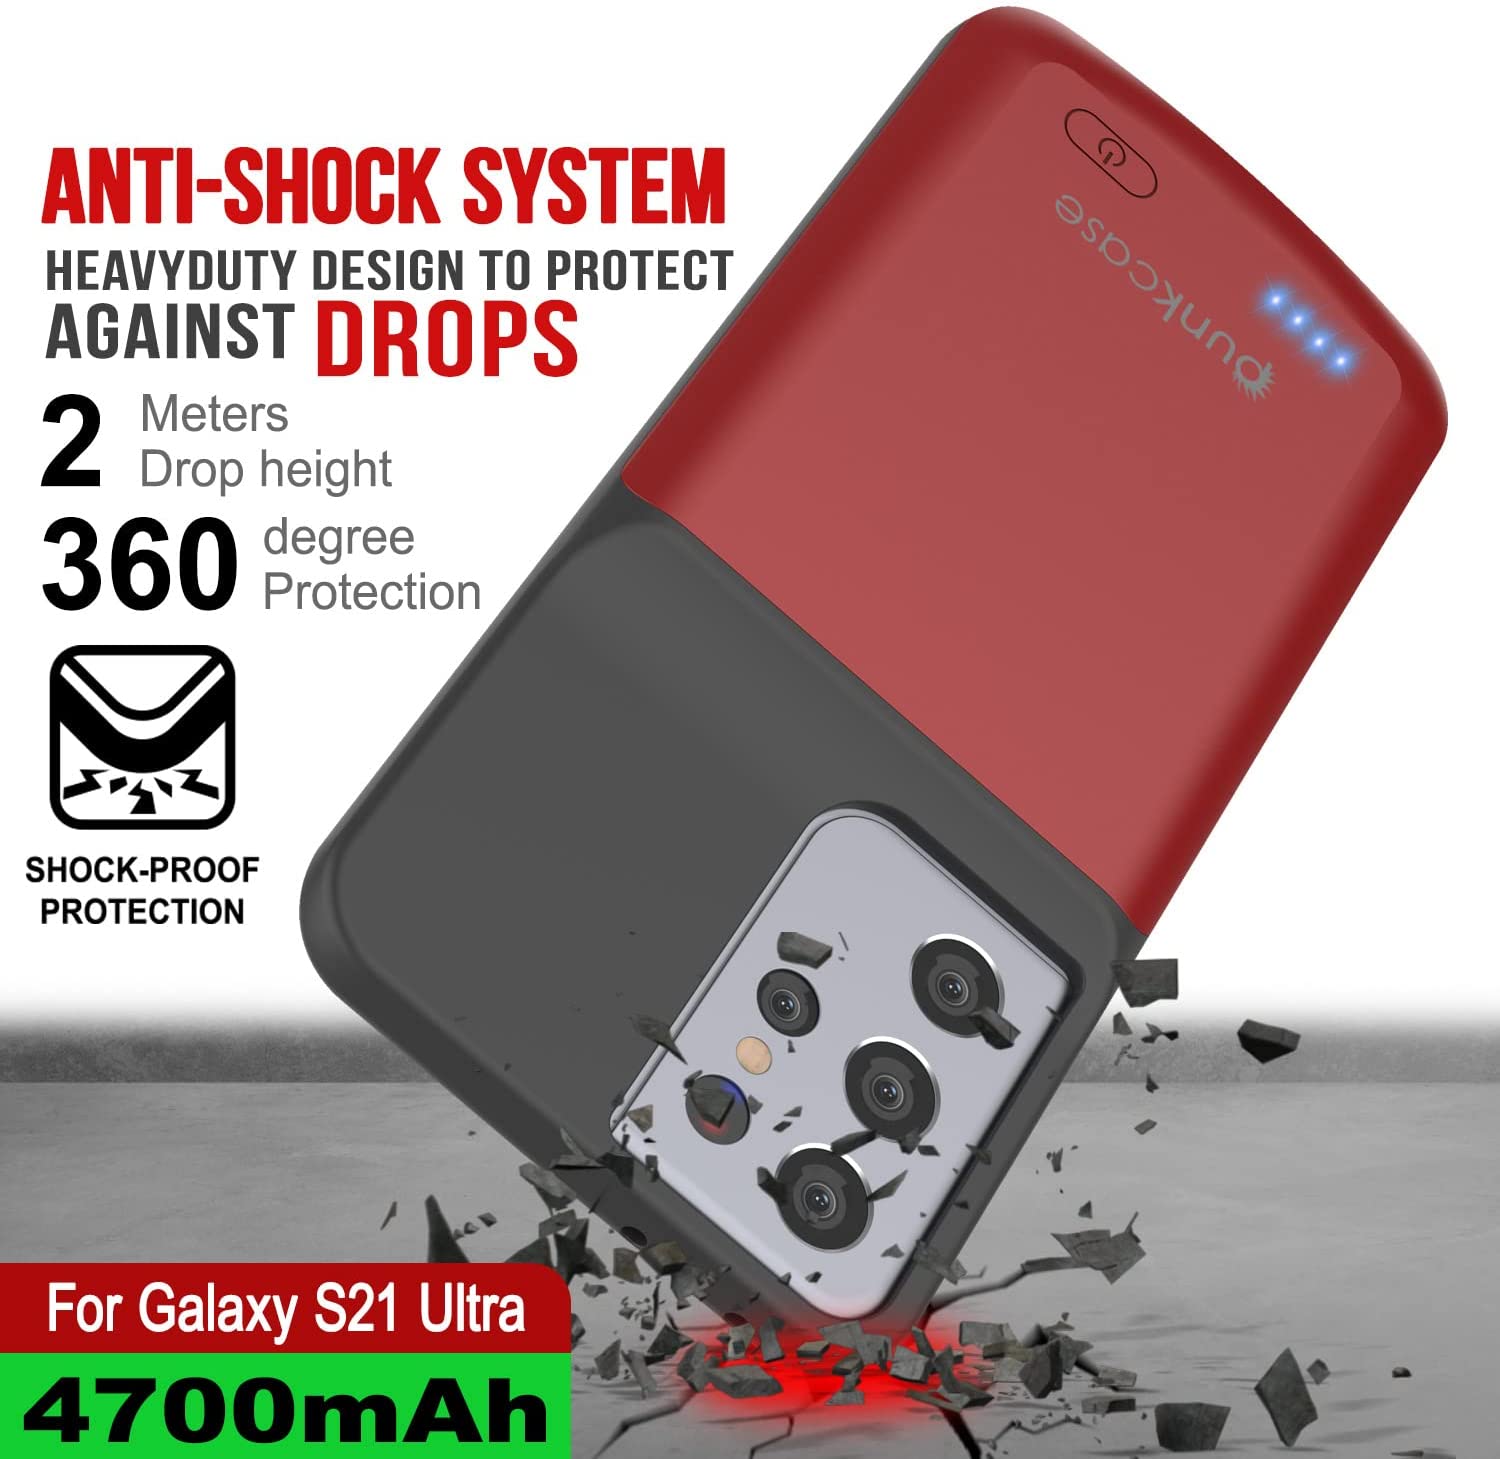 PunkJuice S21 Ultra Battery Case Red - Portable Charging Power Juice Bank with 4700mAh